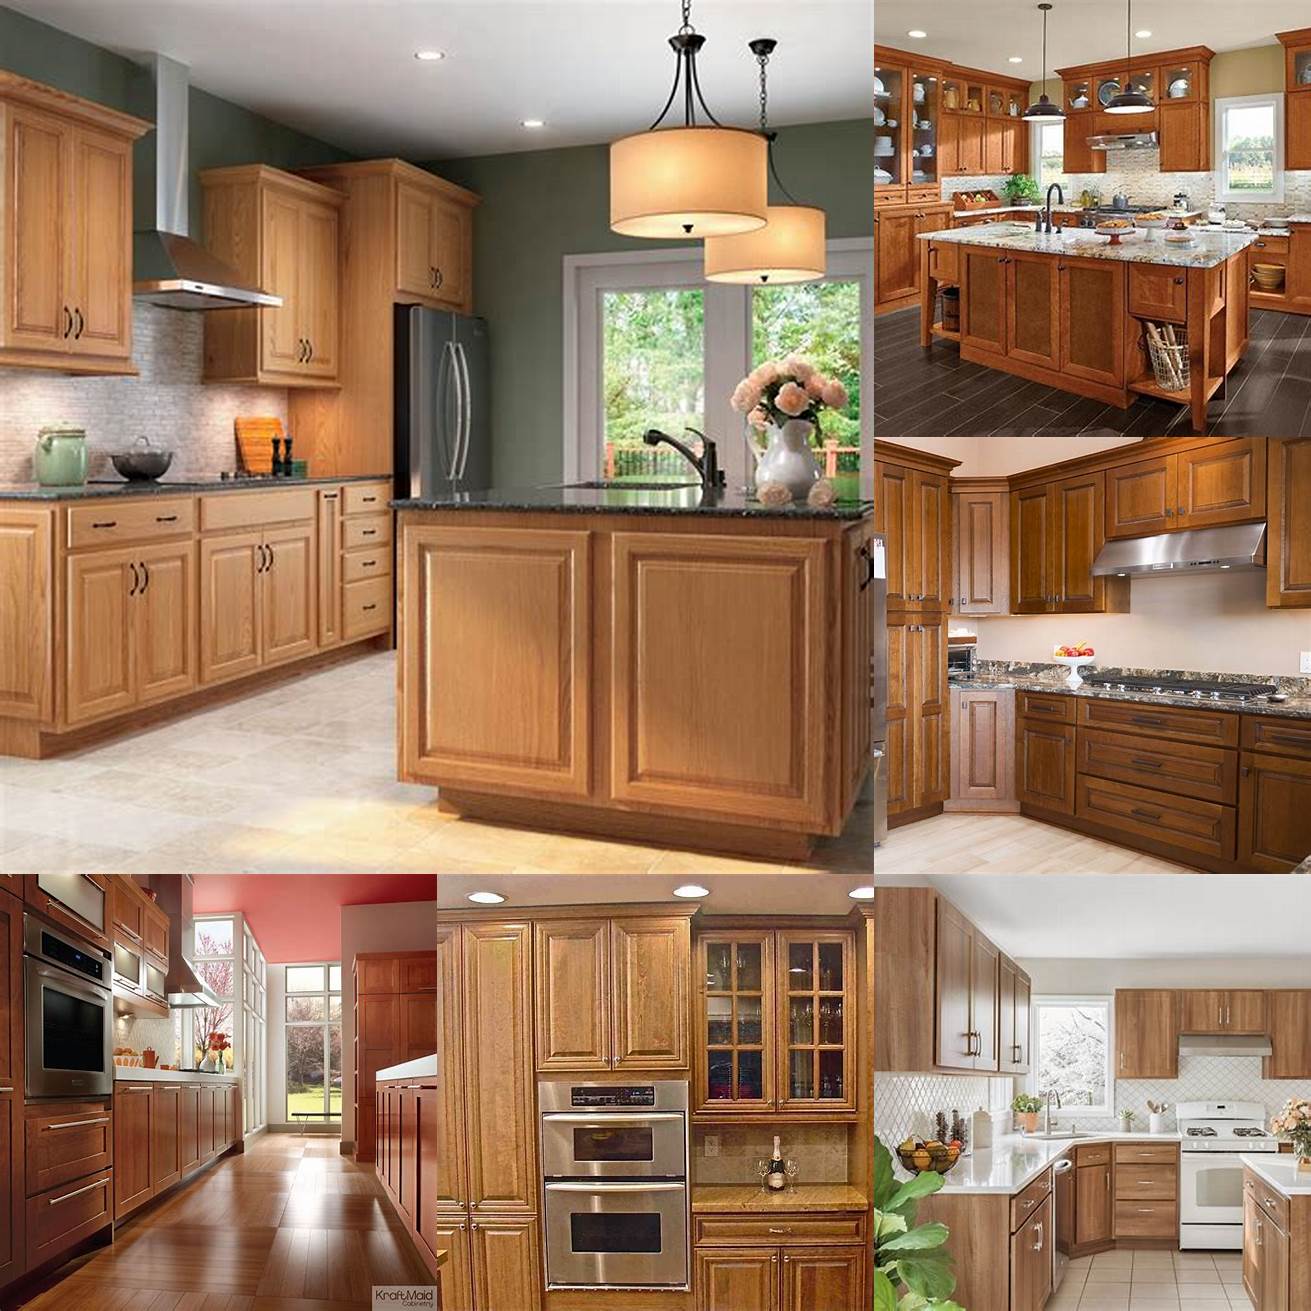 A Sears kitchen cabinet with a stained finish adds warmth and character to any kitchen